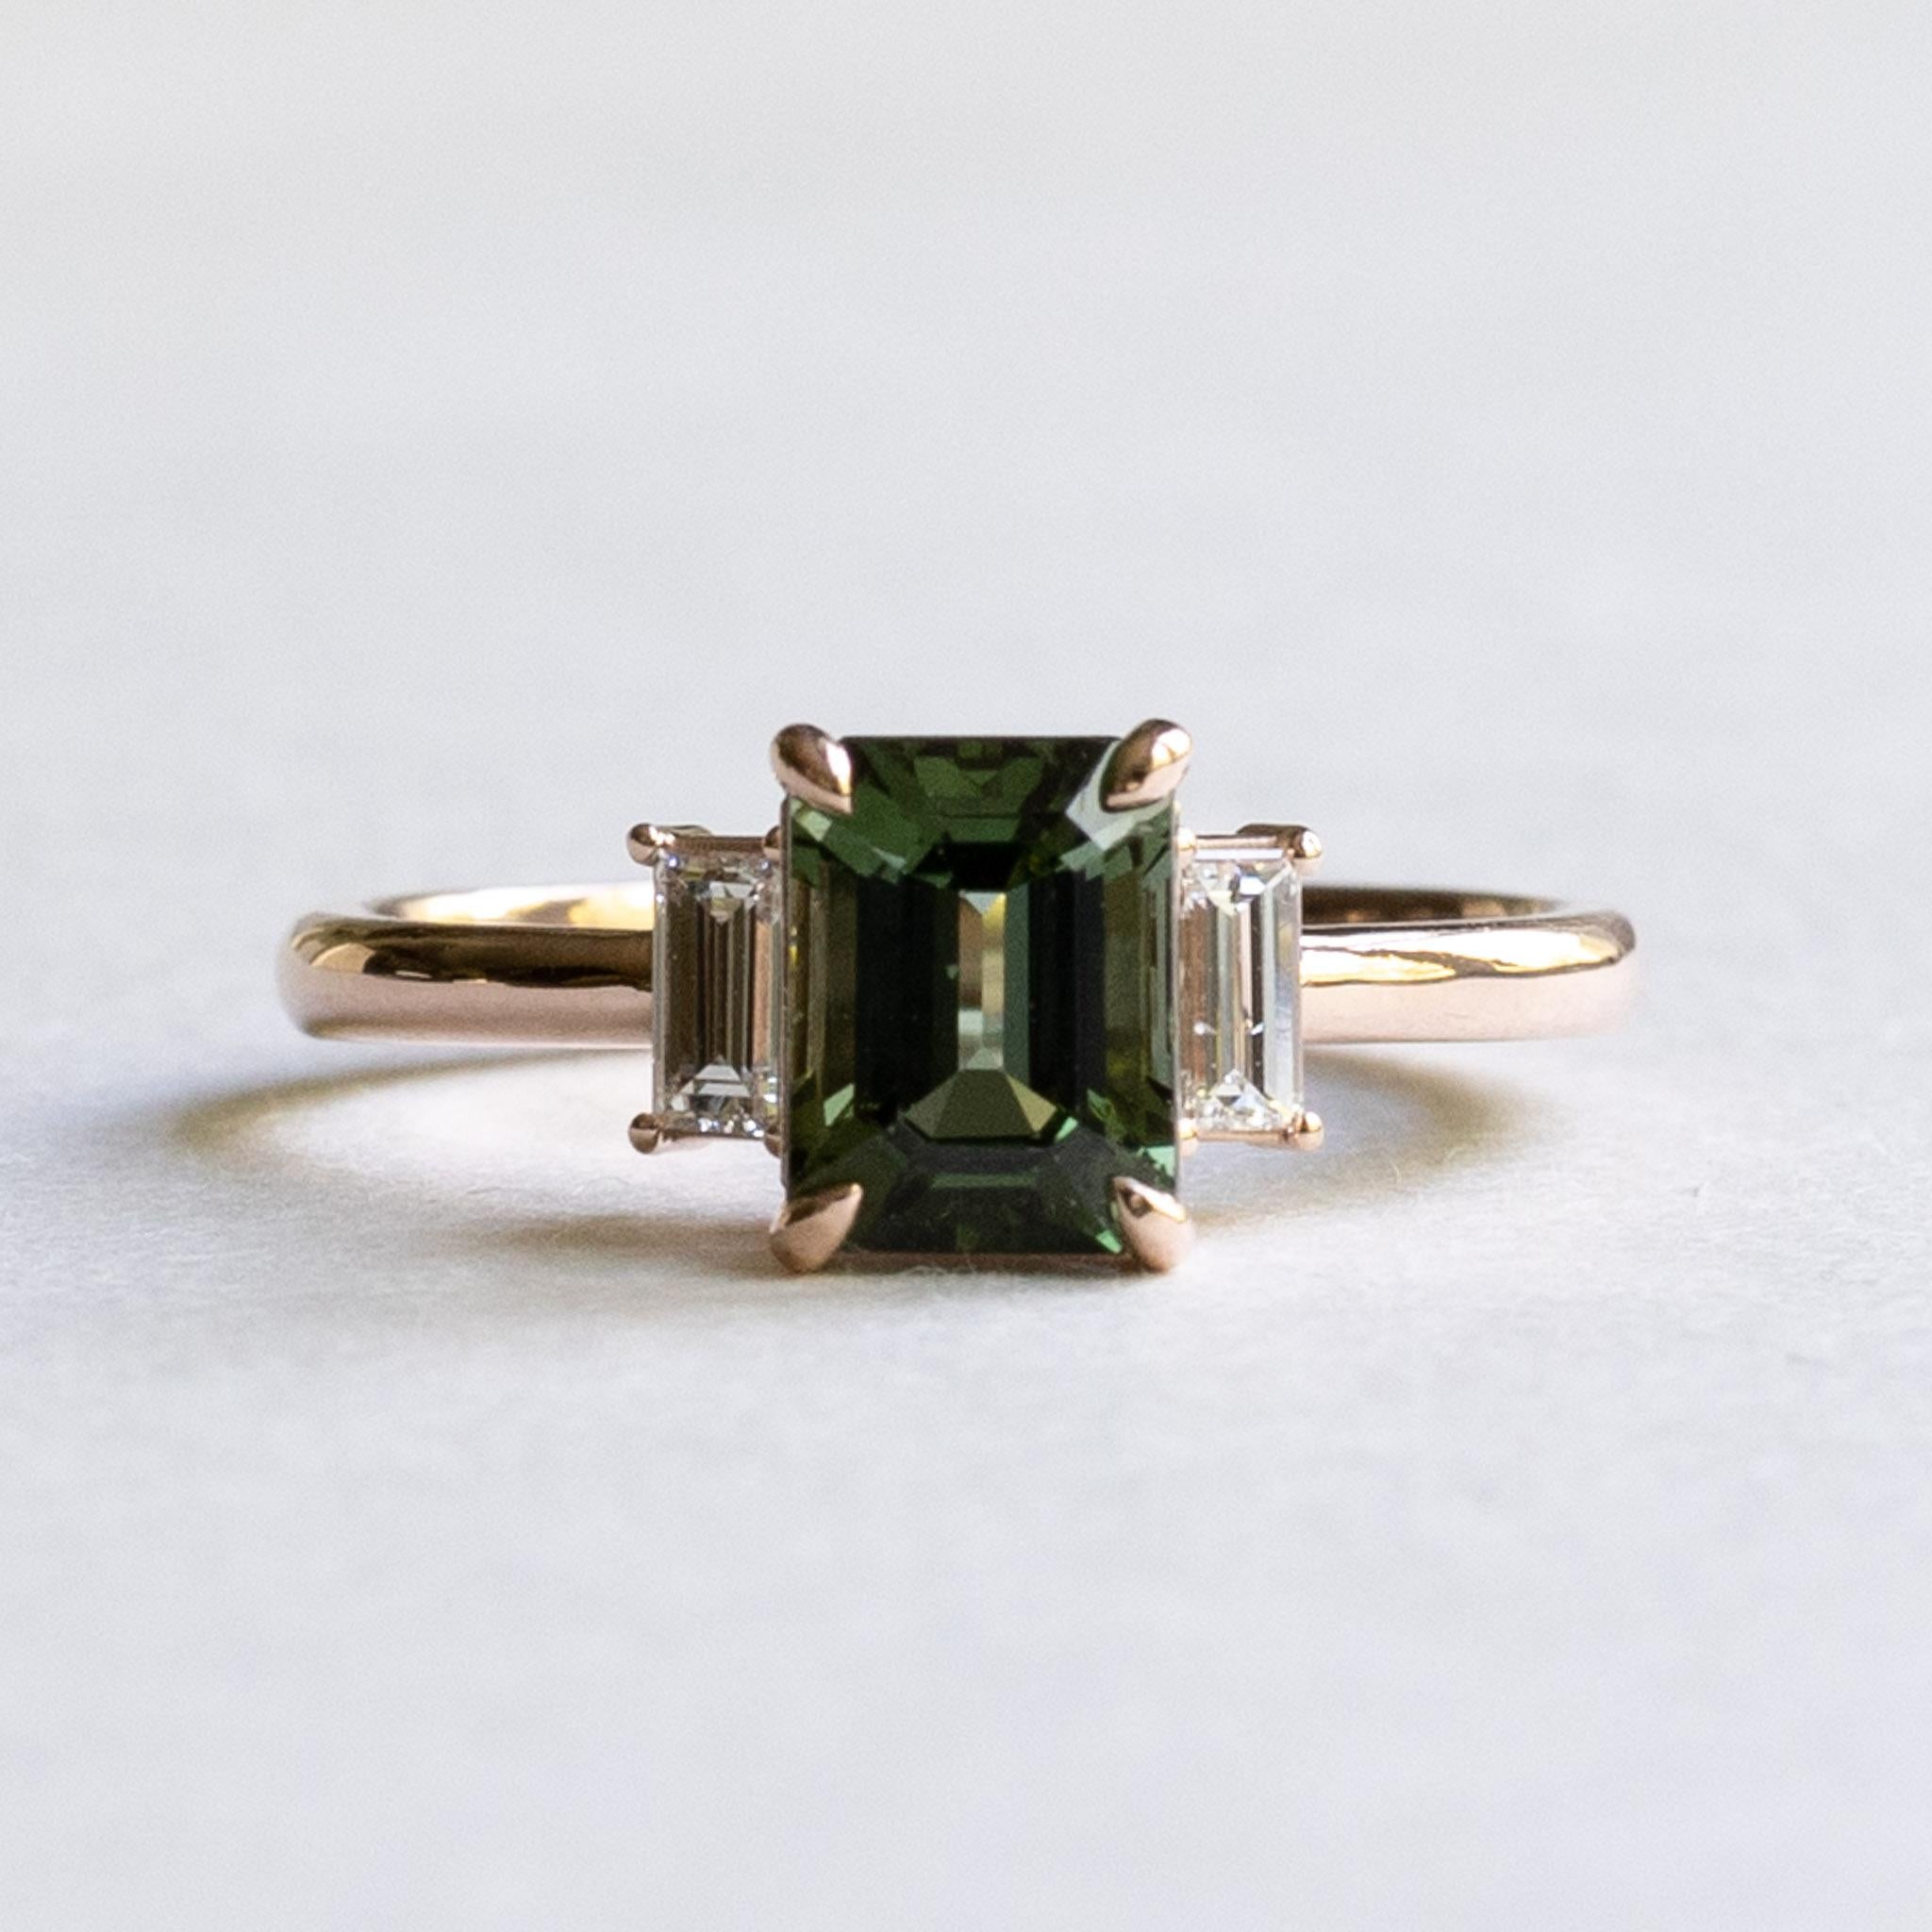 For Sale:  Green Tourmaline Emerald Cut Ring with Baguette Diamonds, Three Stone Ring 5